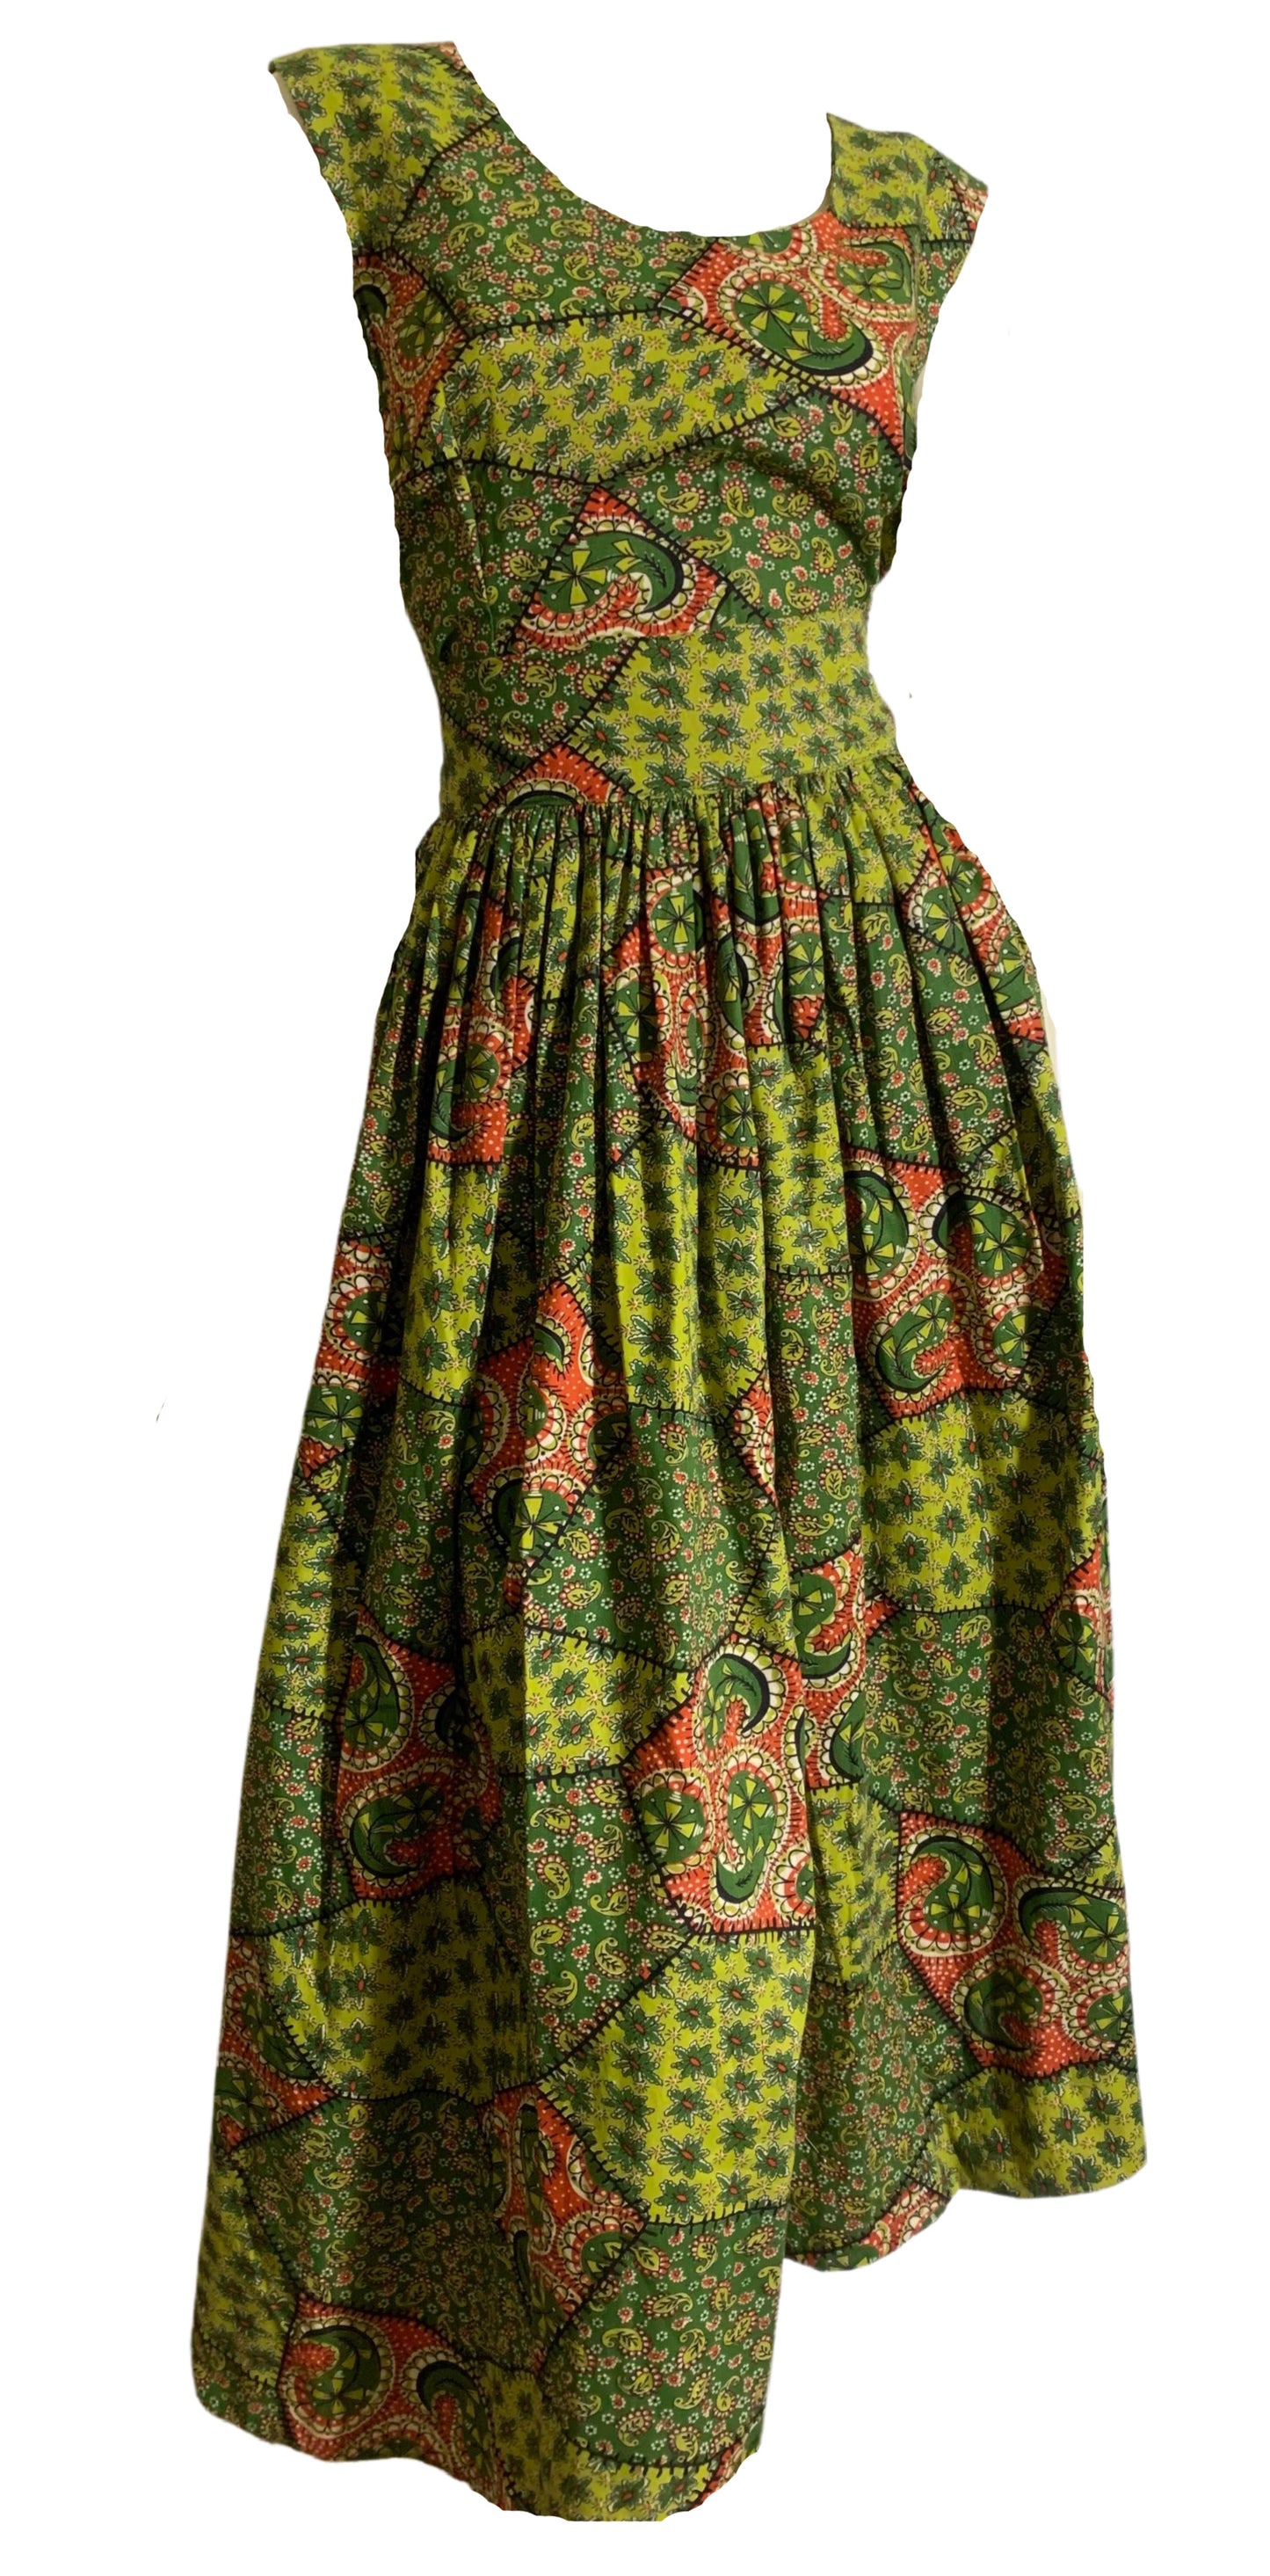 Green and Red Paisley and Patchwork Print Cotton Full Skirt 2 Pc Dress Set circa 1950s